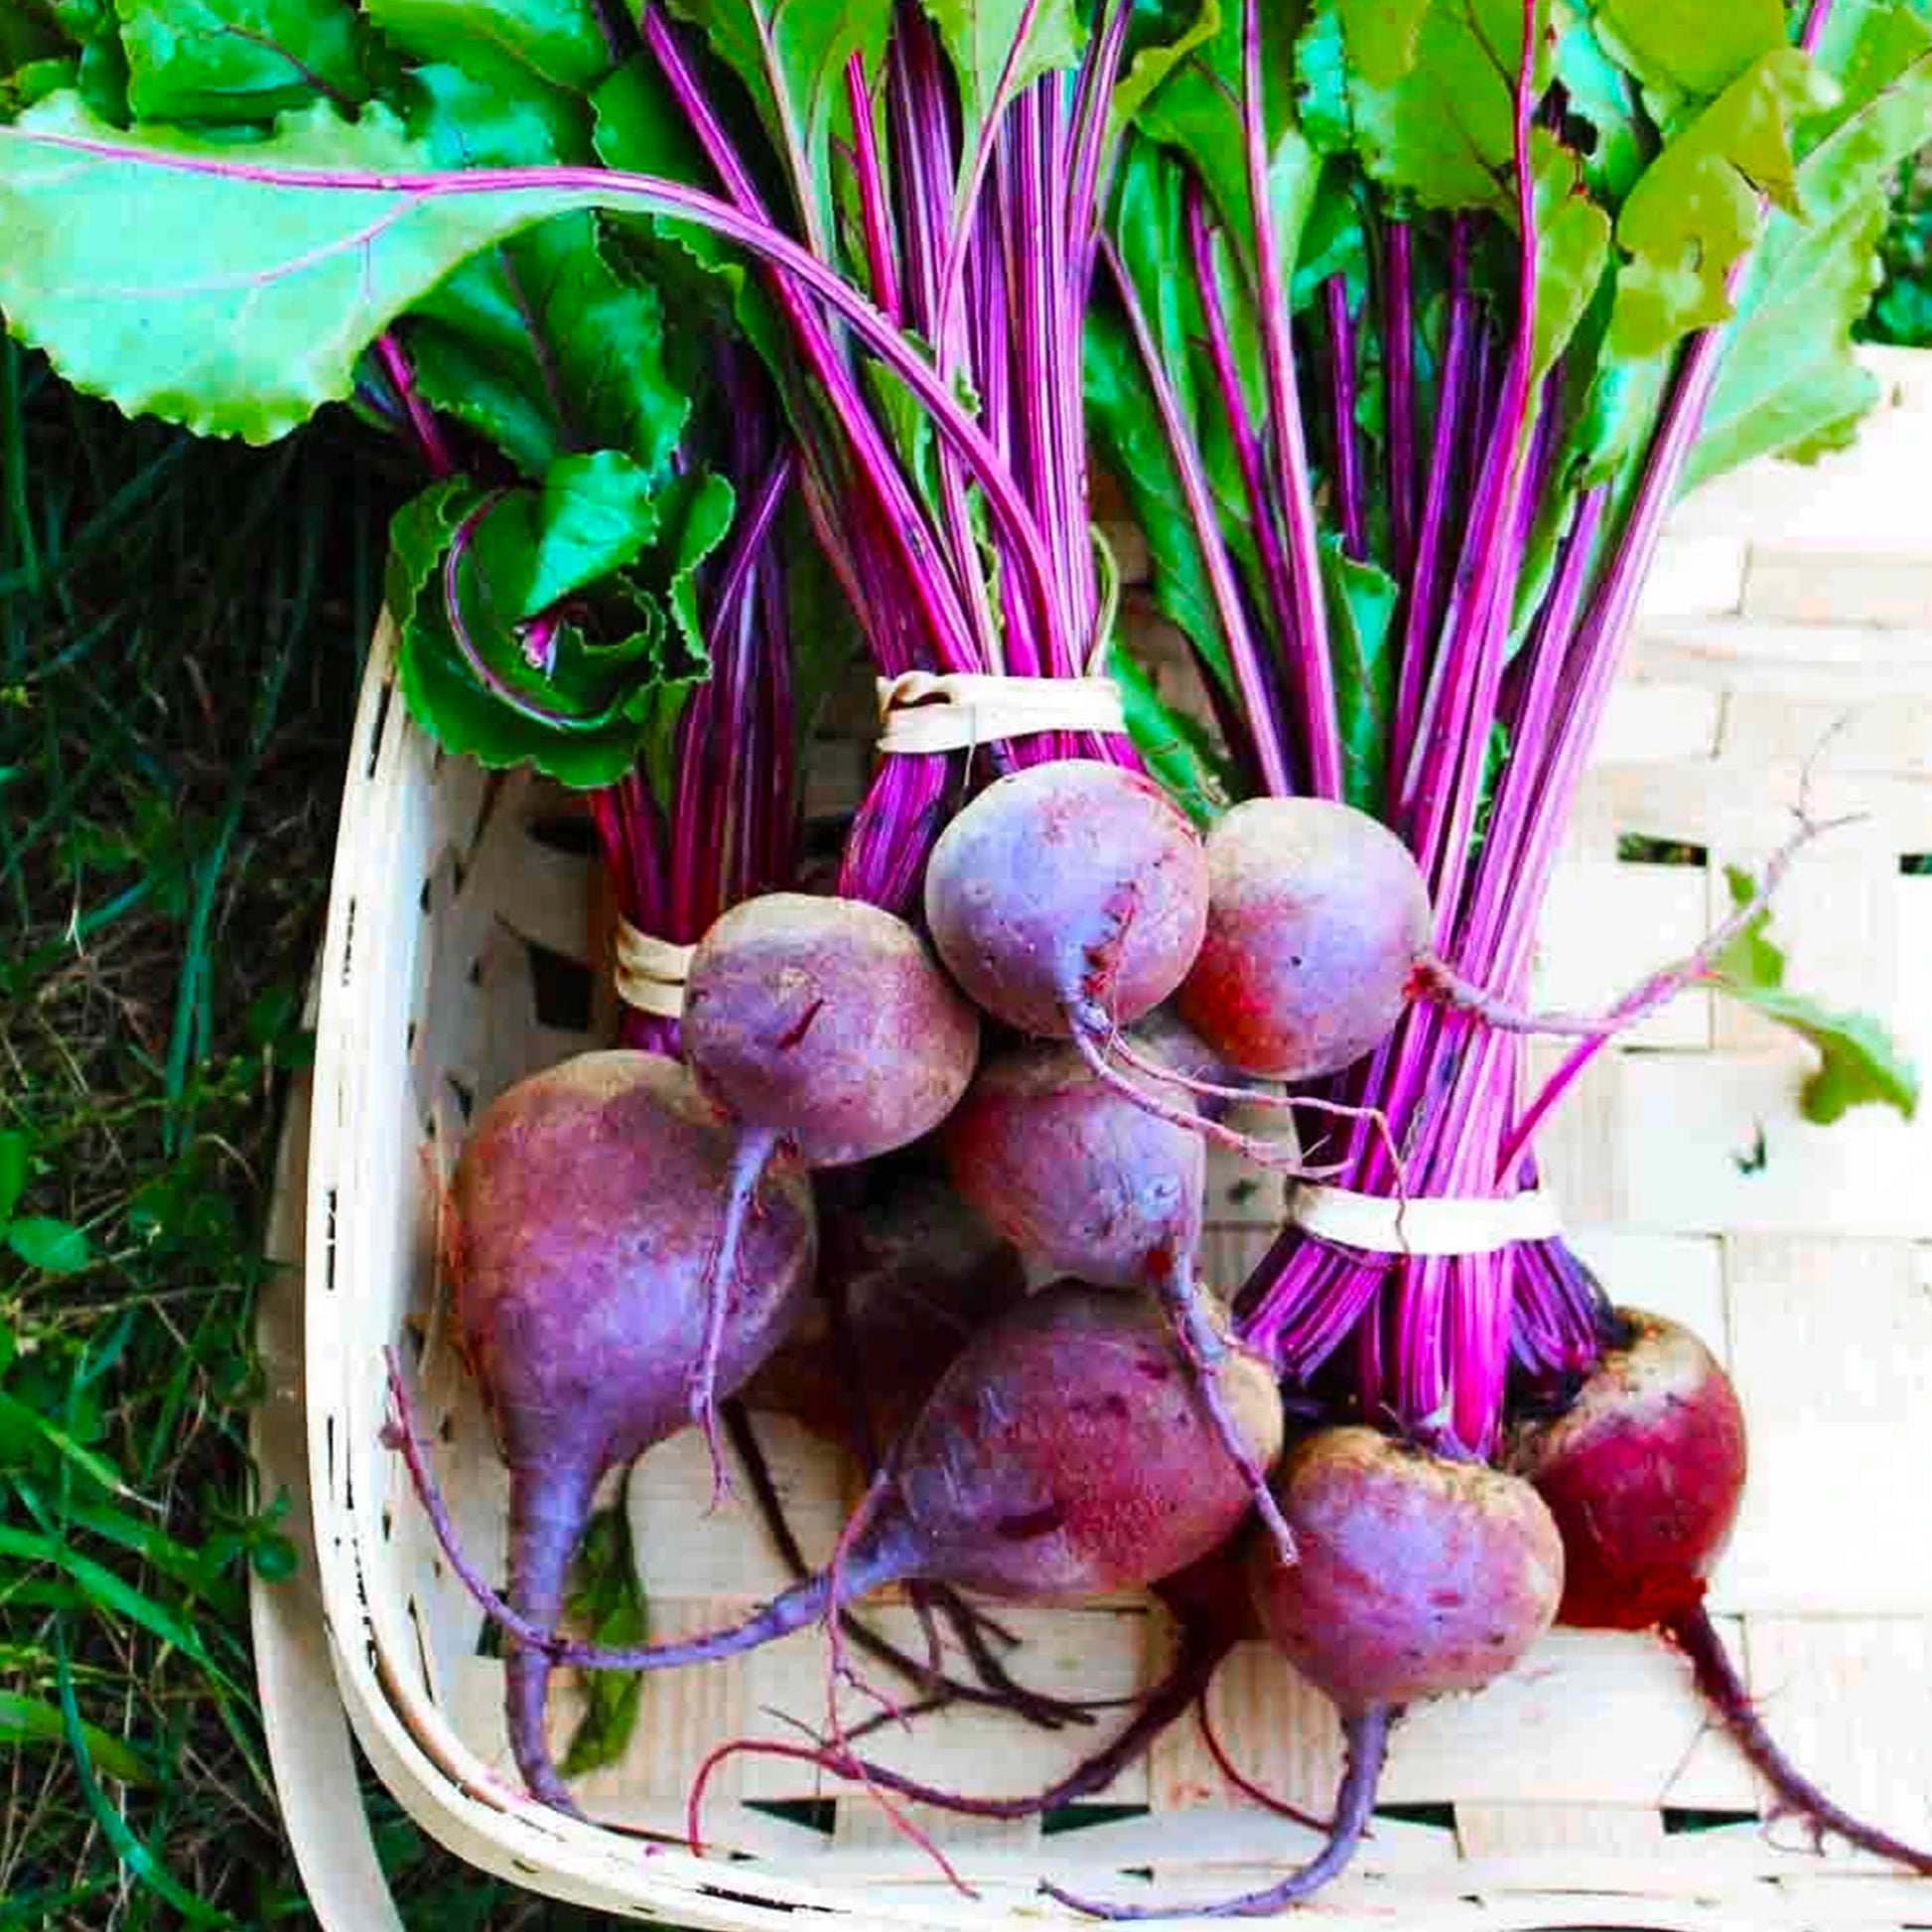 Tall Top Early Wonder Beets seeds fully matured and harvested inside of a basket.